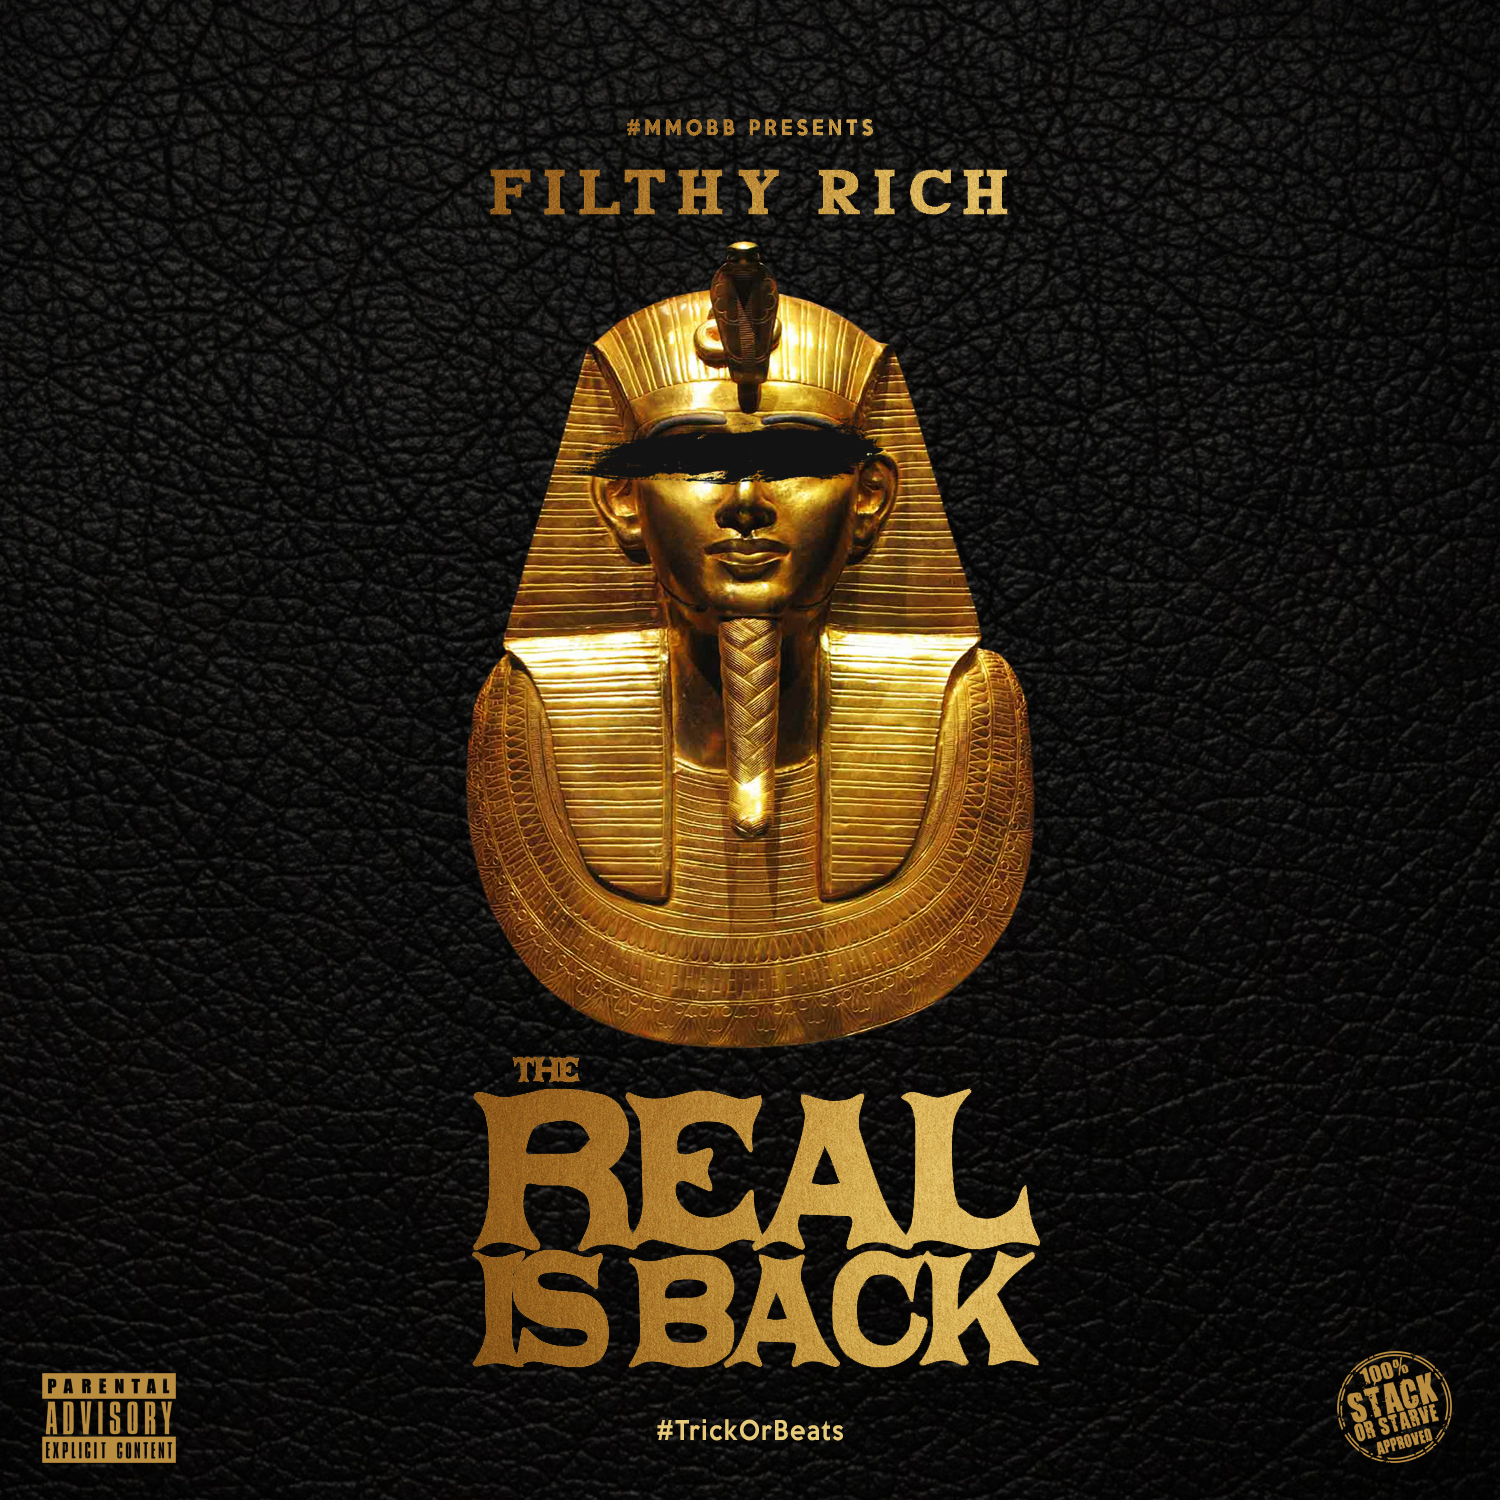 Images of Filthy Rich | 1500x1500